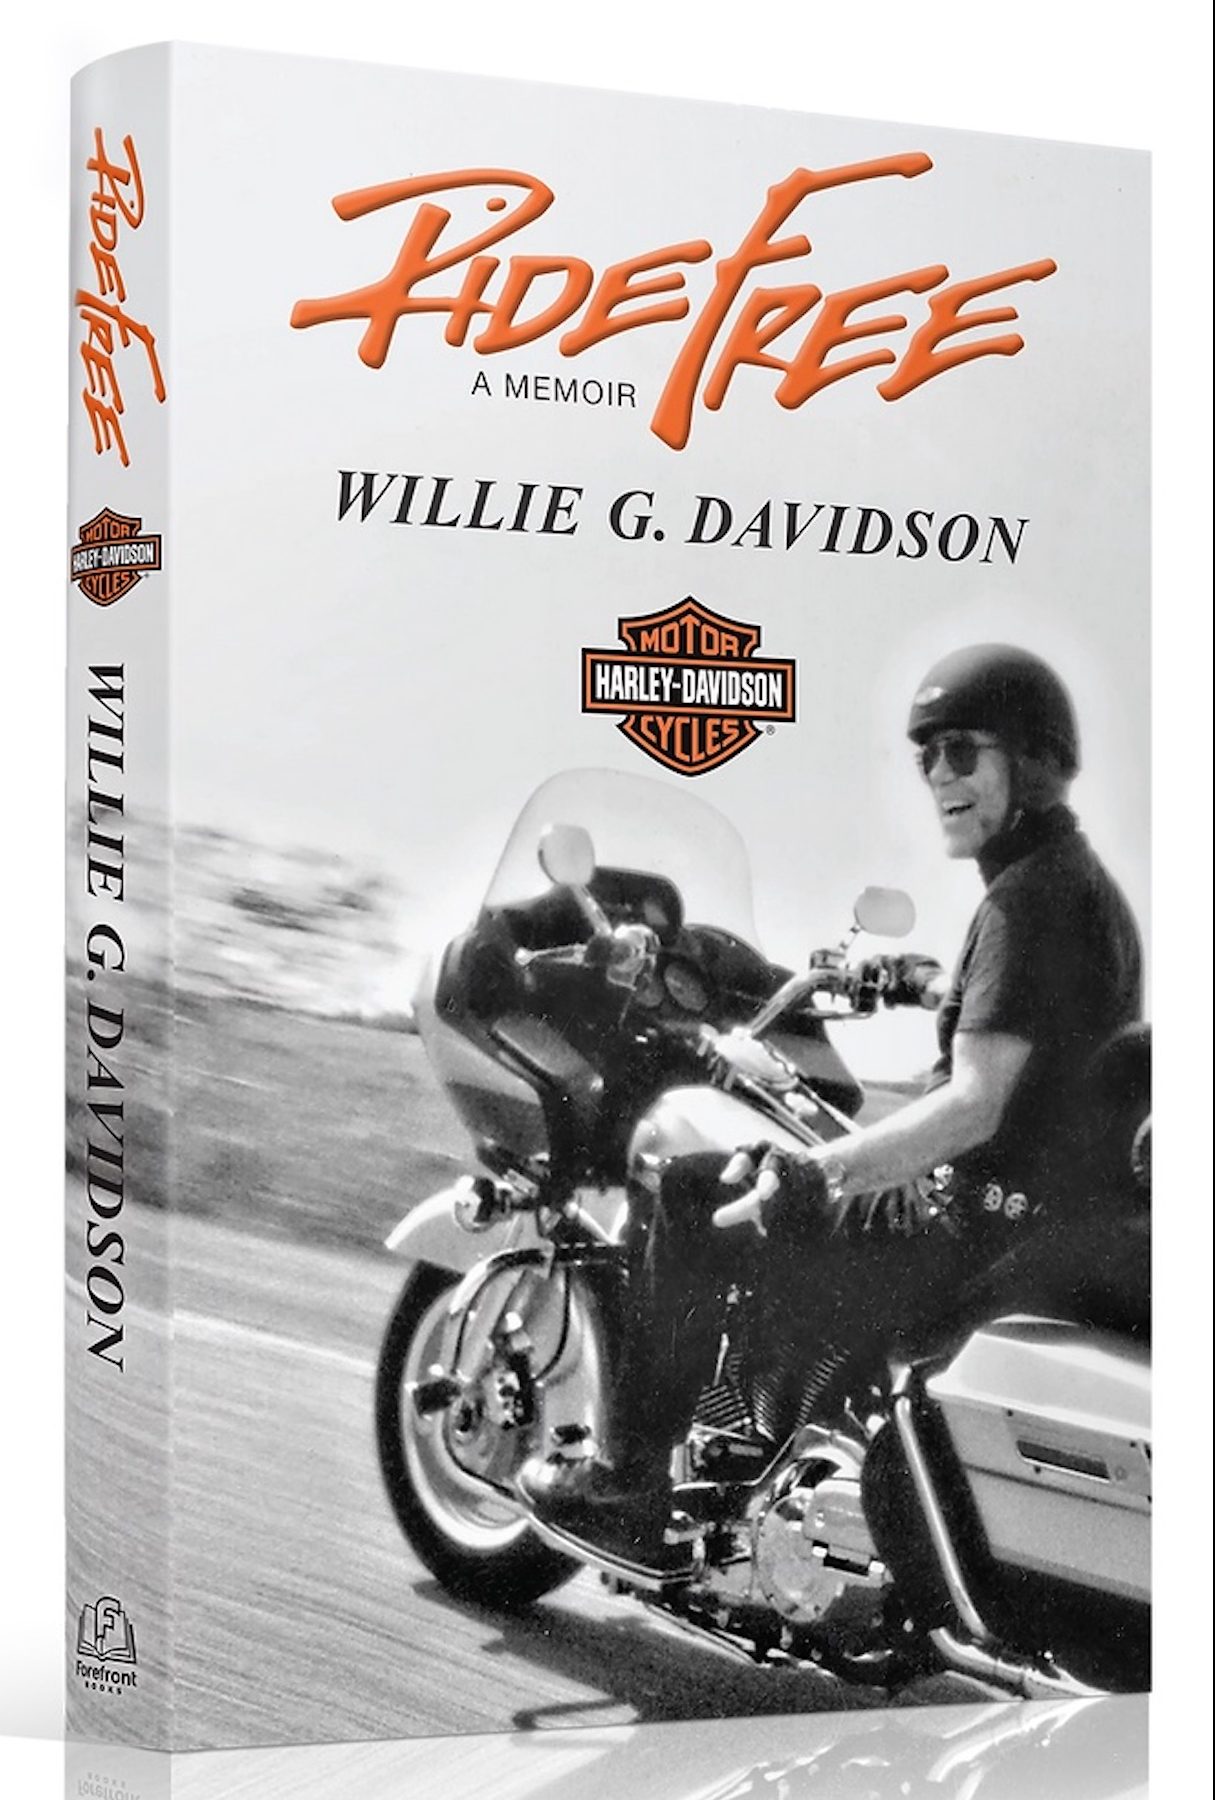 Willie G. Davidson's new memoir, Ride Free. Media sourced from the original press release. 